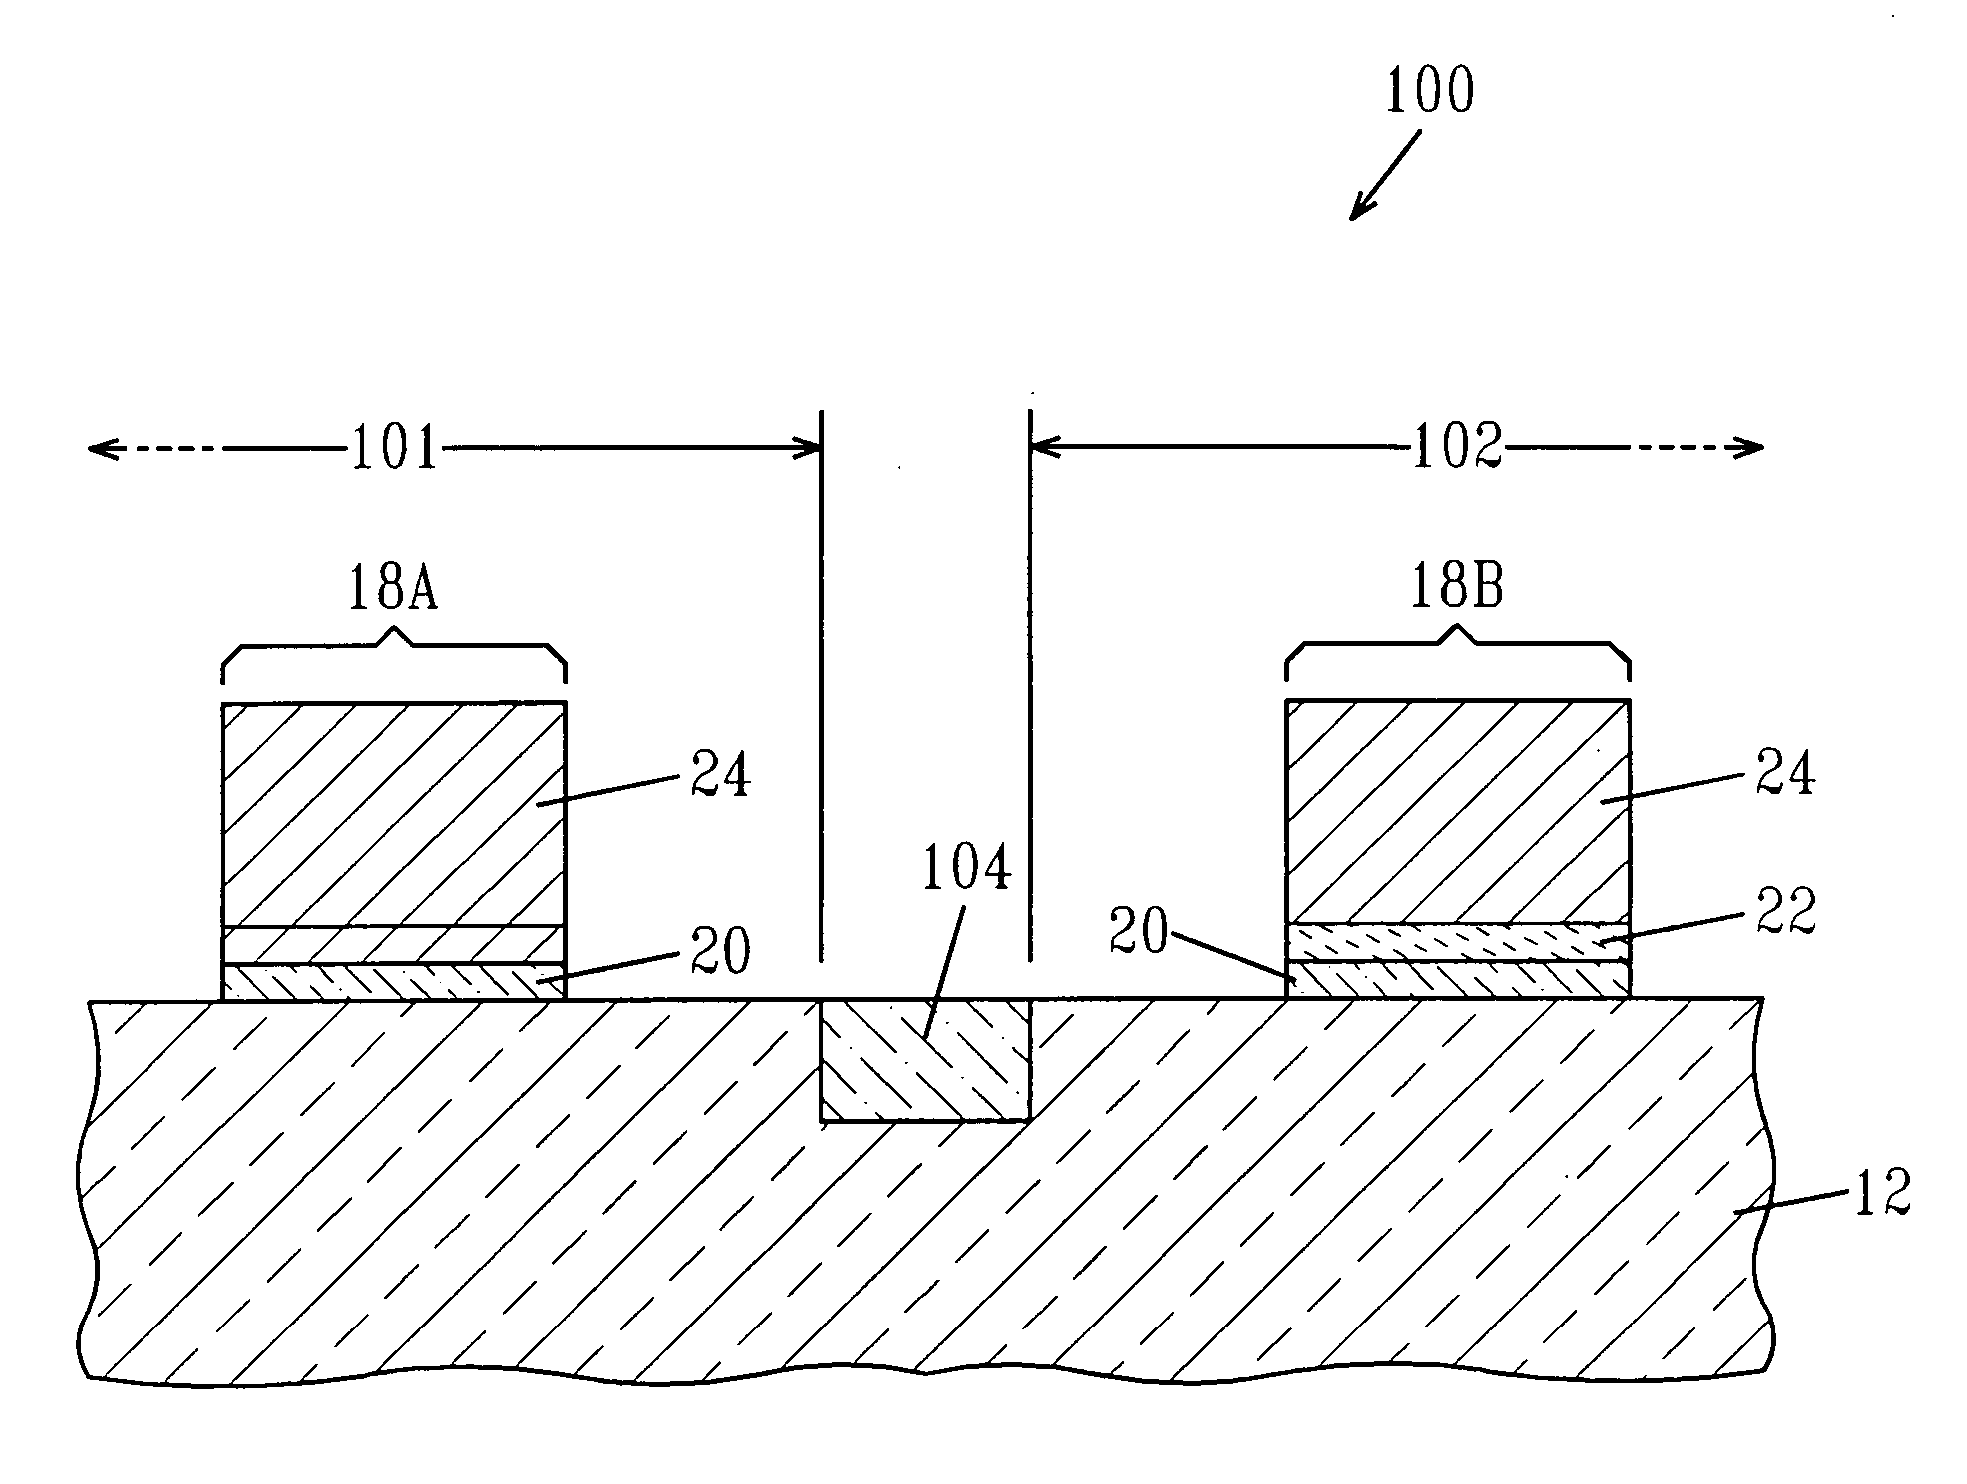 Nitrogen-containing field effect transistor gate stack containing a threshold voltage control layer formed via deposition of a metal oxide